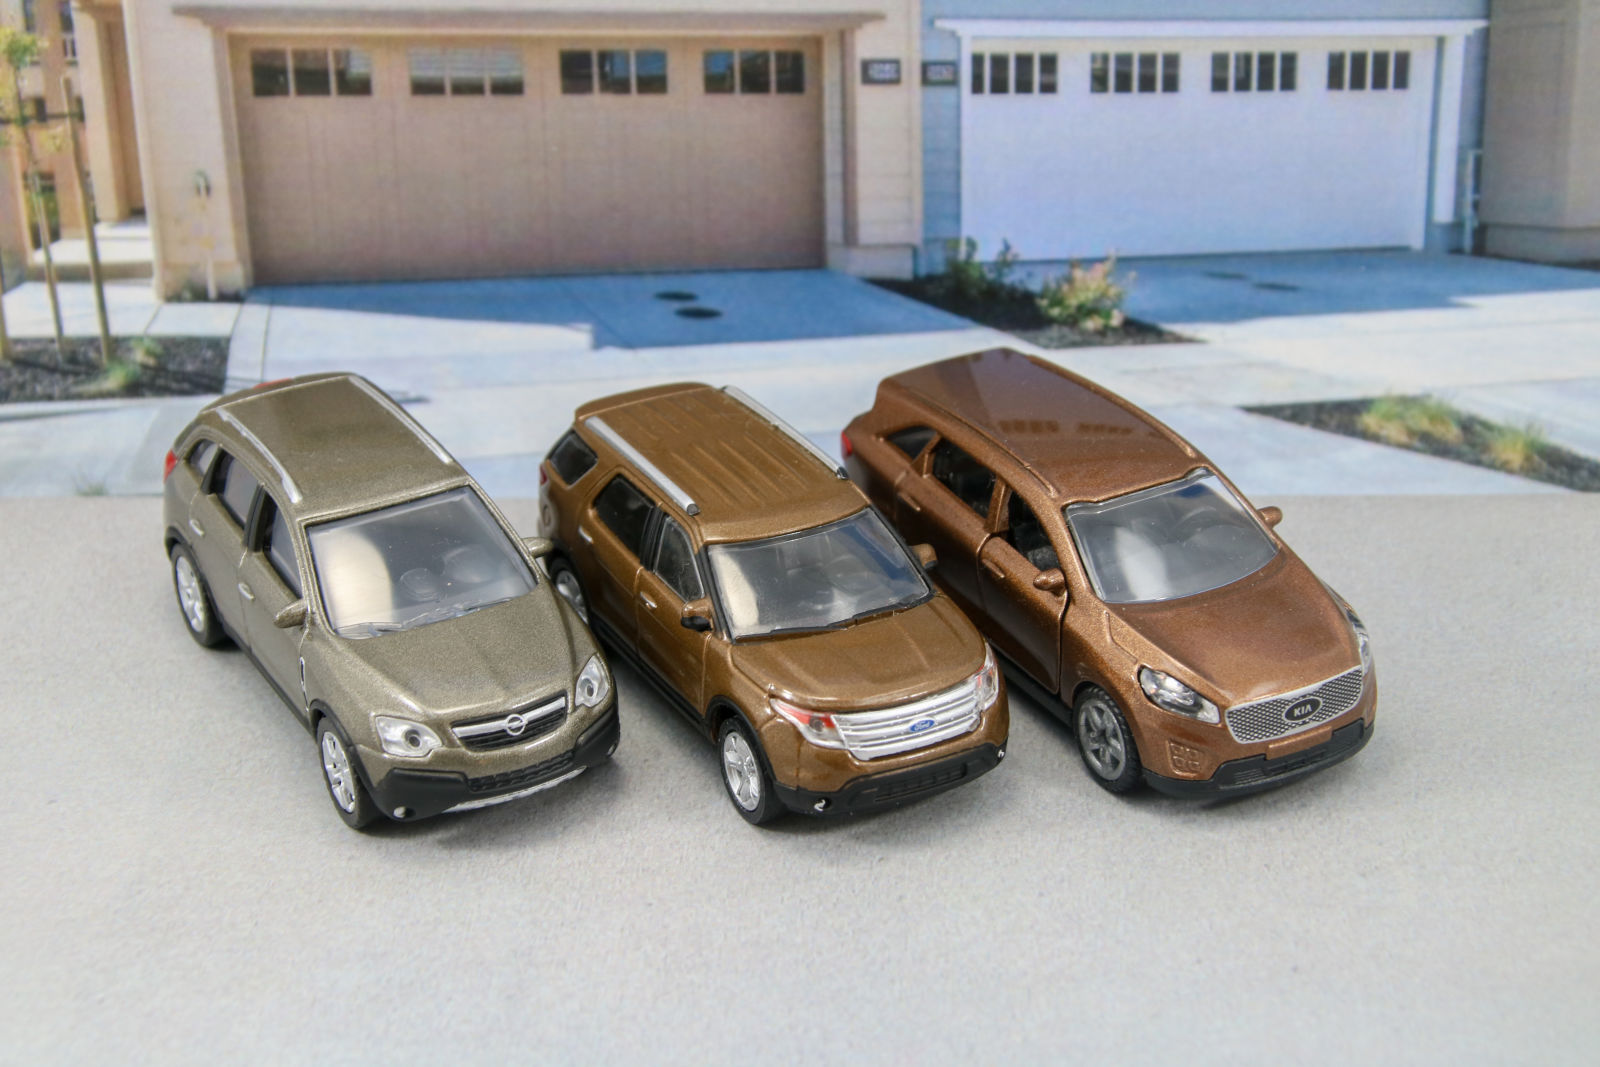 Illustration for article titled Suburban Sundays: A Trio of Brown CUVs